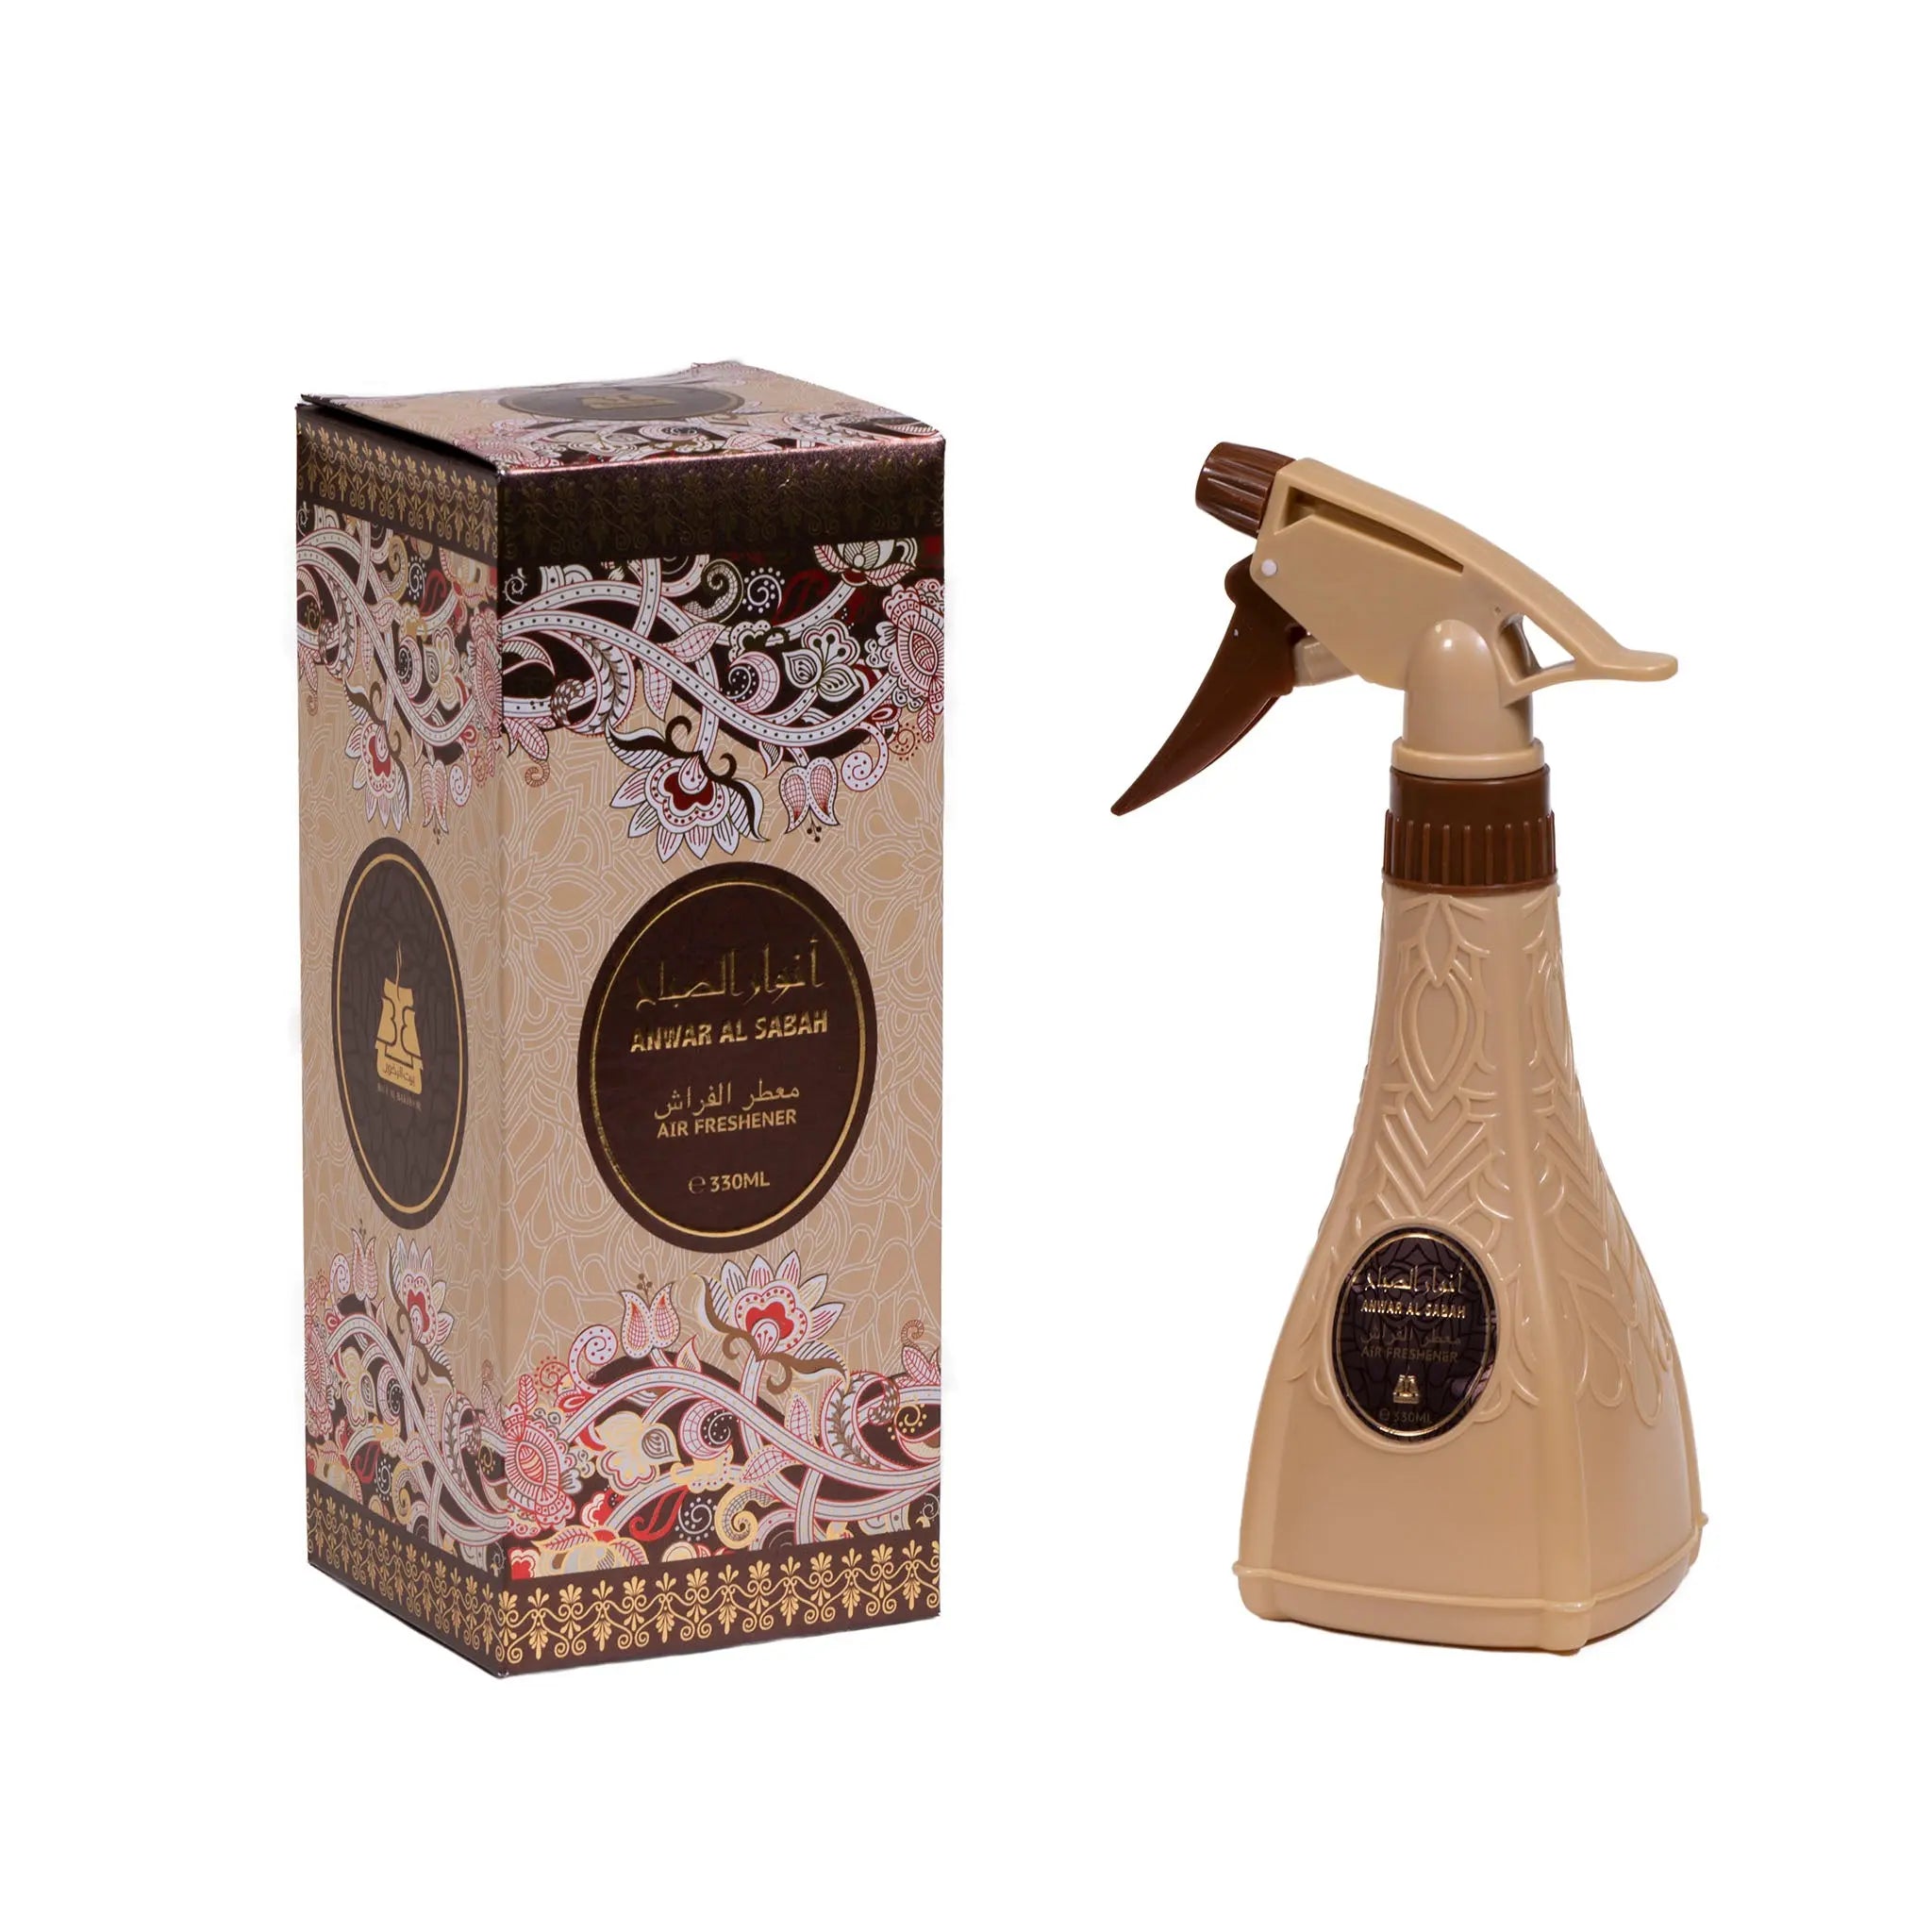 The image features a product set including an air freshener spray bottle and its packaging box. The spray bottle is a beige color with a dark brown, ornate design and a label that matches the box's aesthetic, featuring Arabic calligraphy and an English translation, presumably the name of the scent "ANWAR AL SABAH." The trigger of the spray is a dark brown color, complementing the overall design. Both the bottle and the box share a luxurious, traditional Middle Eastern design aesthetic.